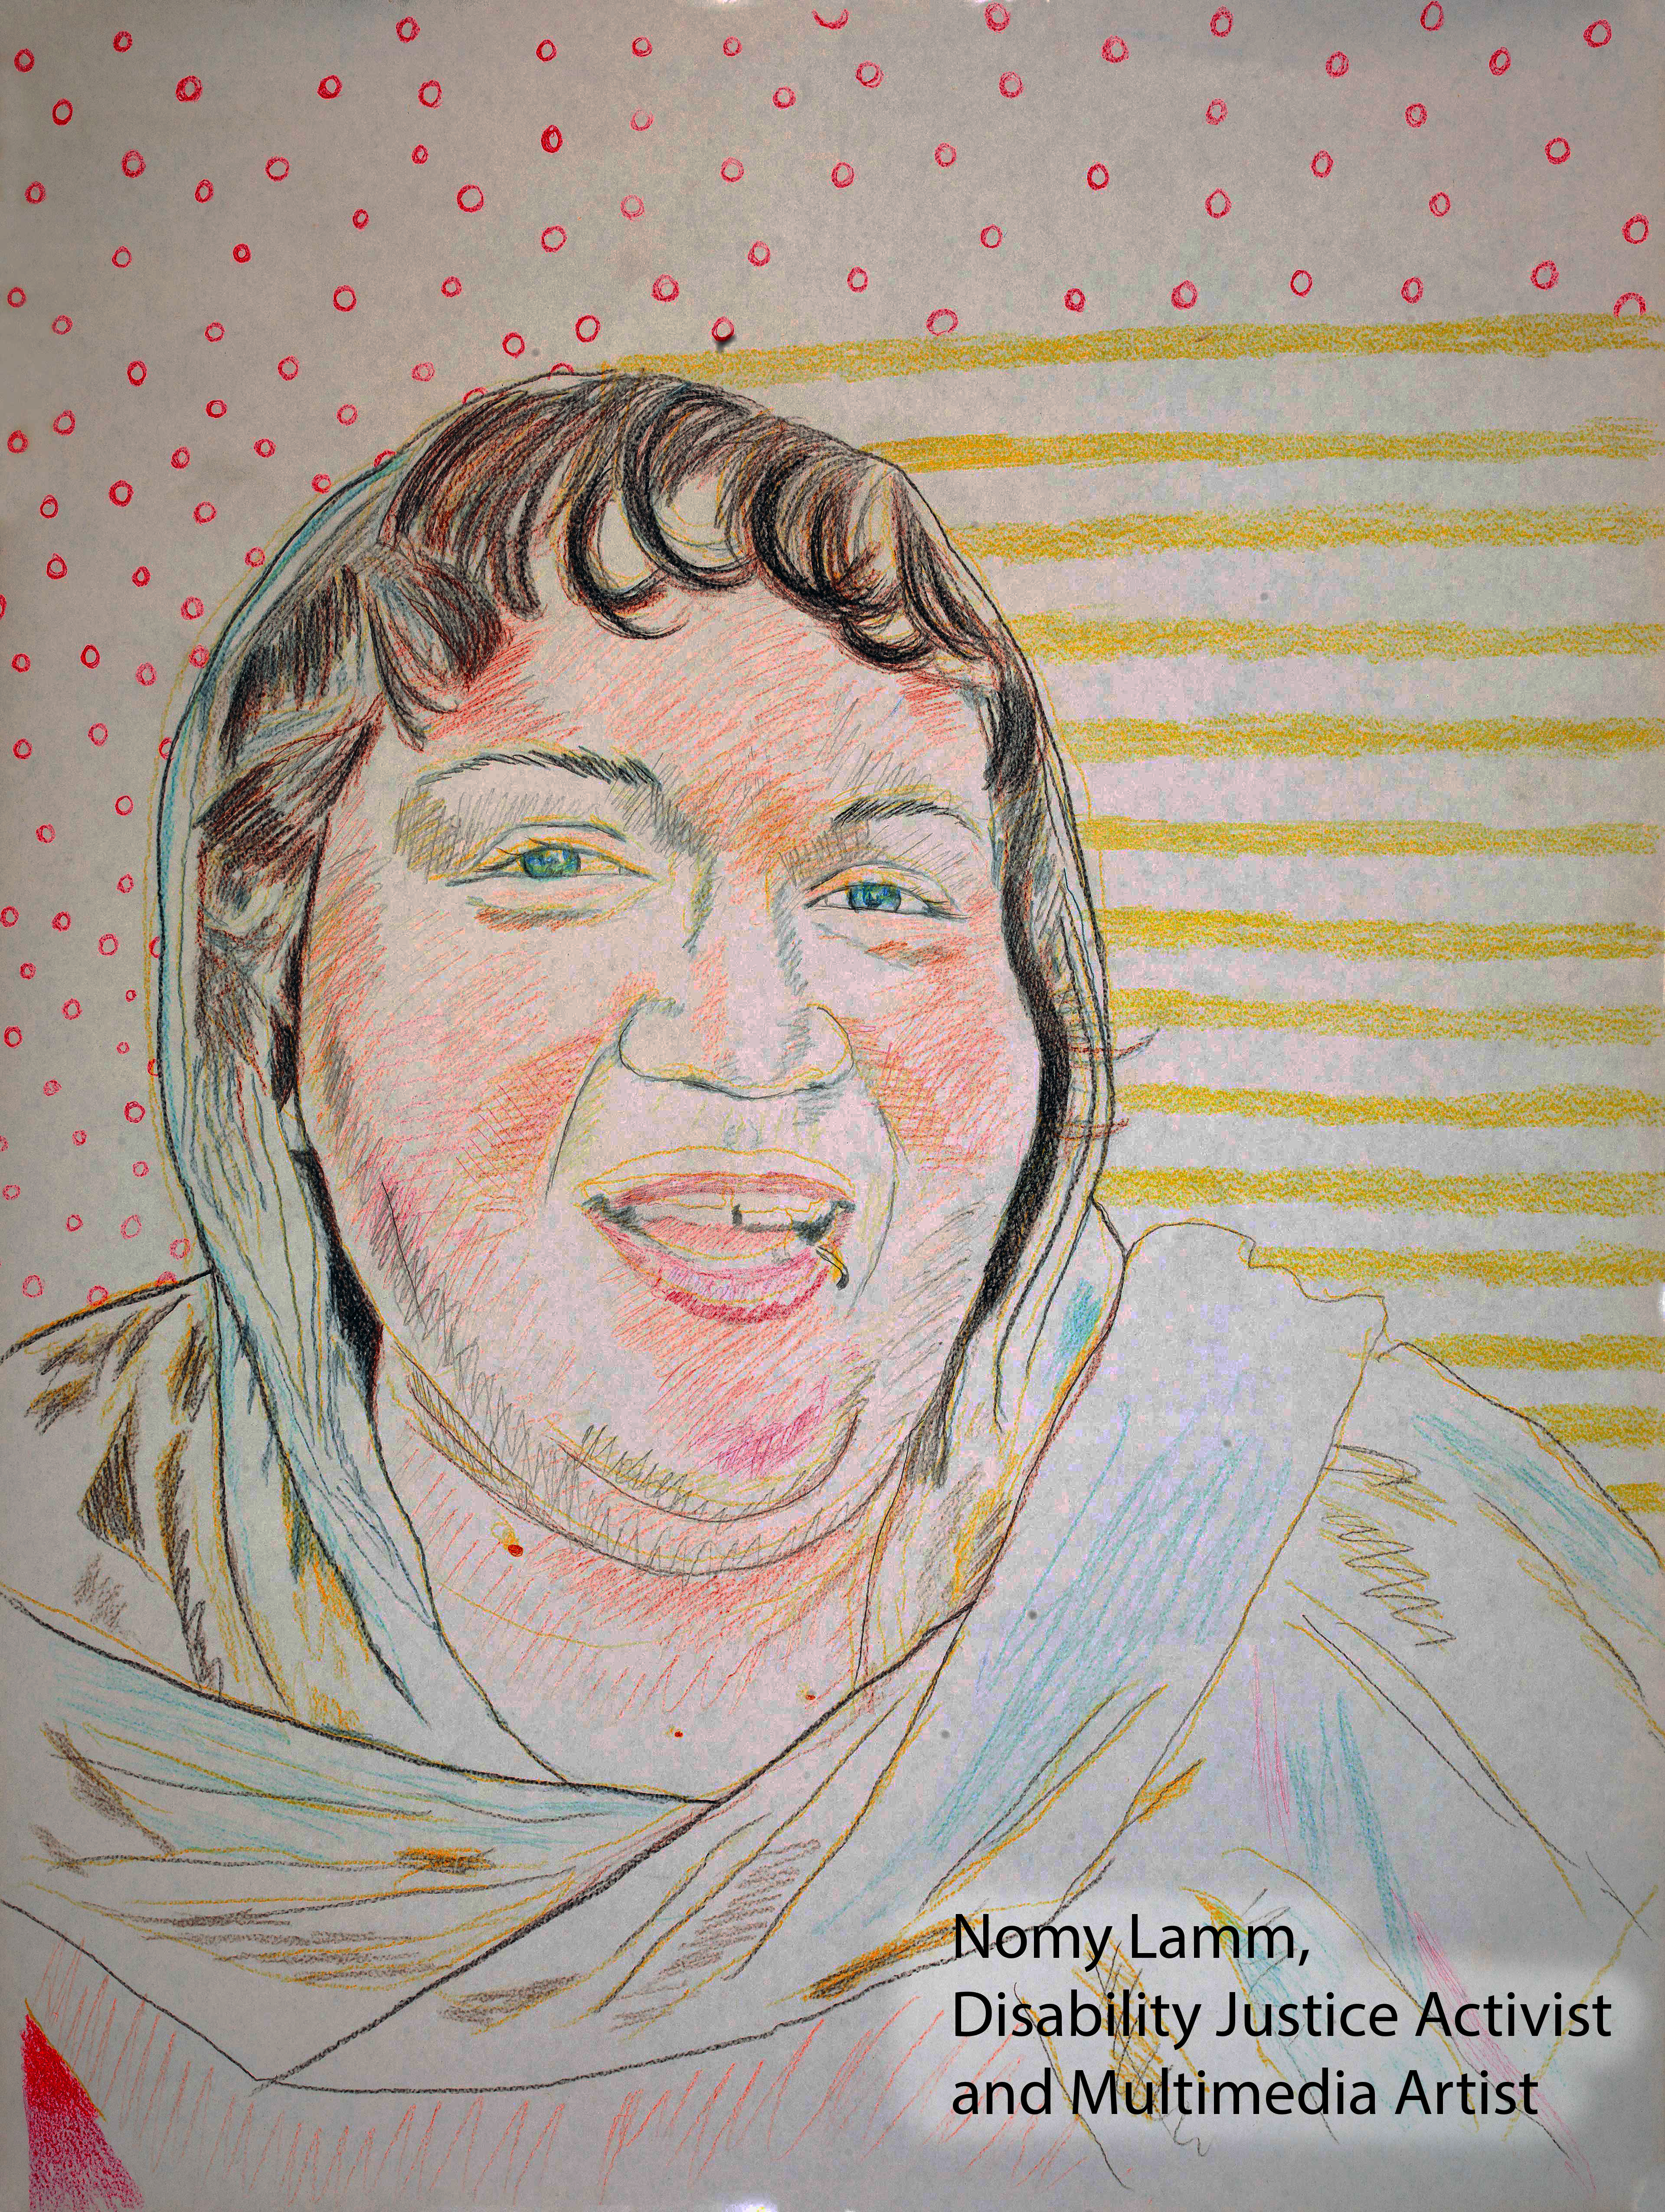 Colored pencil drawing of Nomy Lamm, Disability Justice Activist and Multimedia Artist.